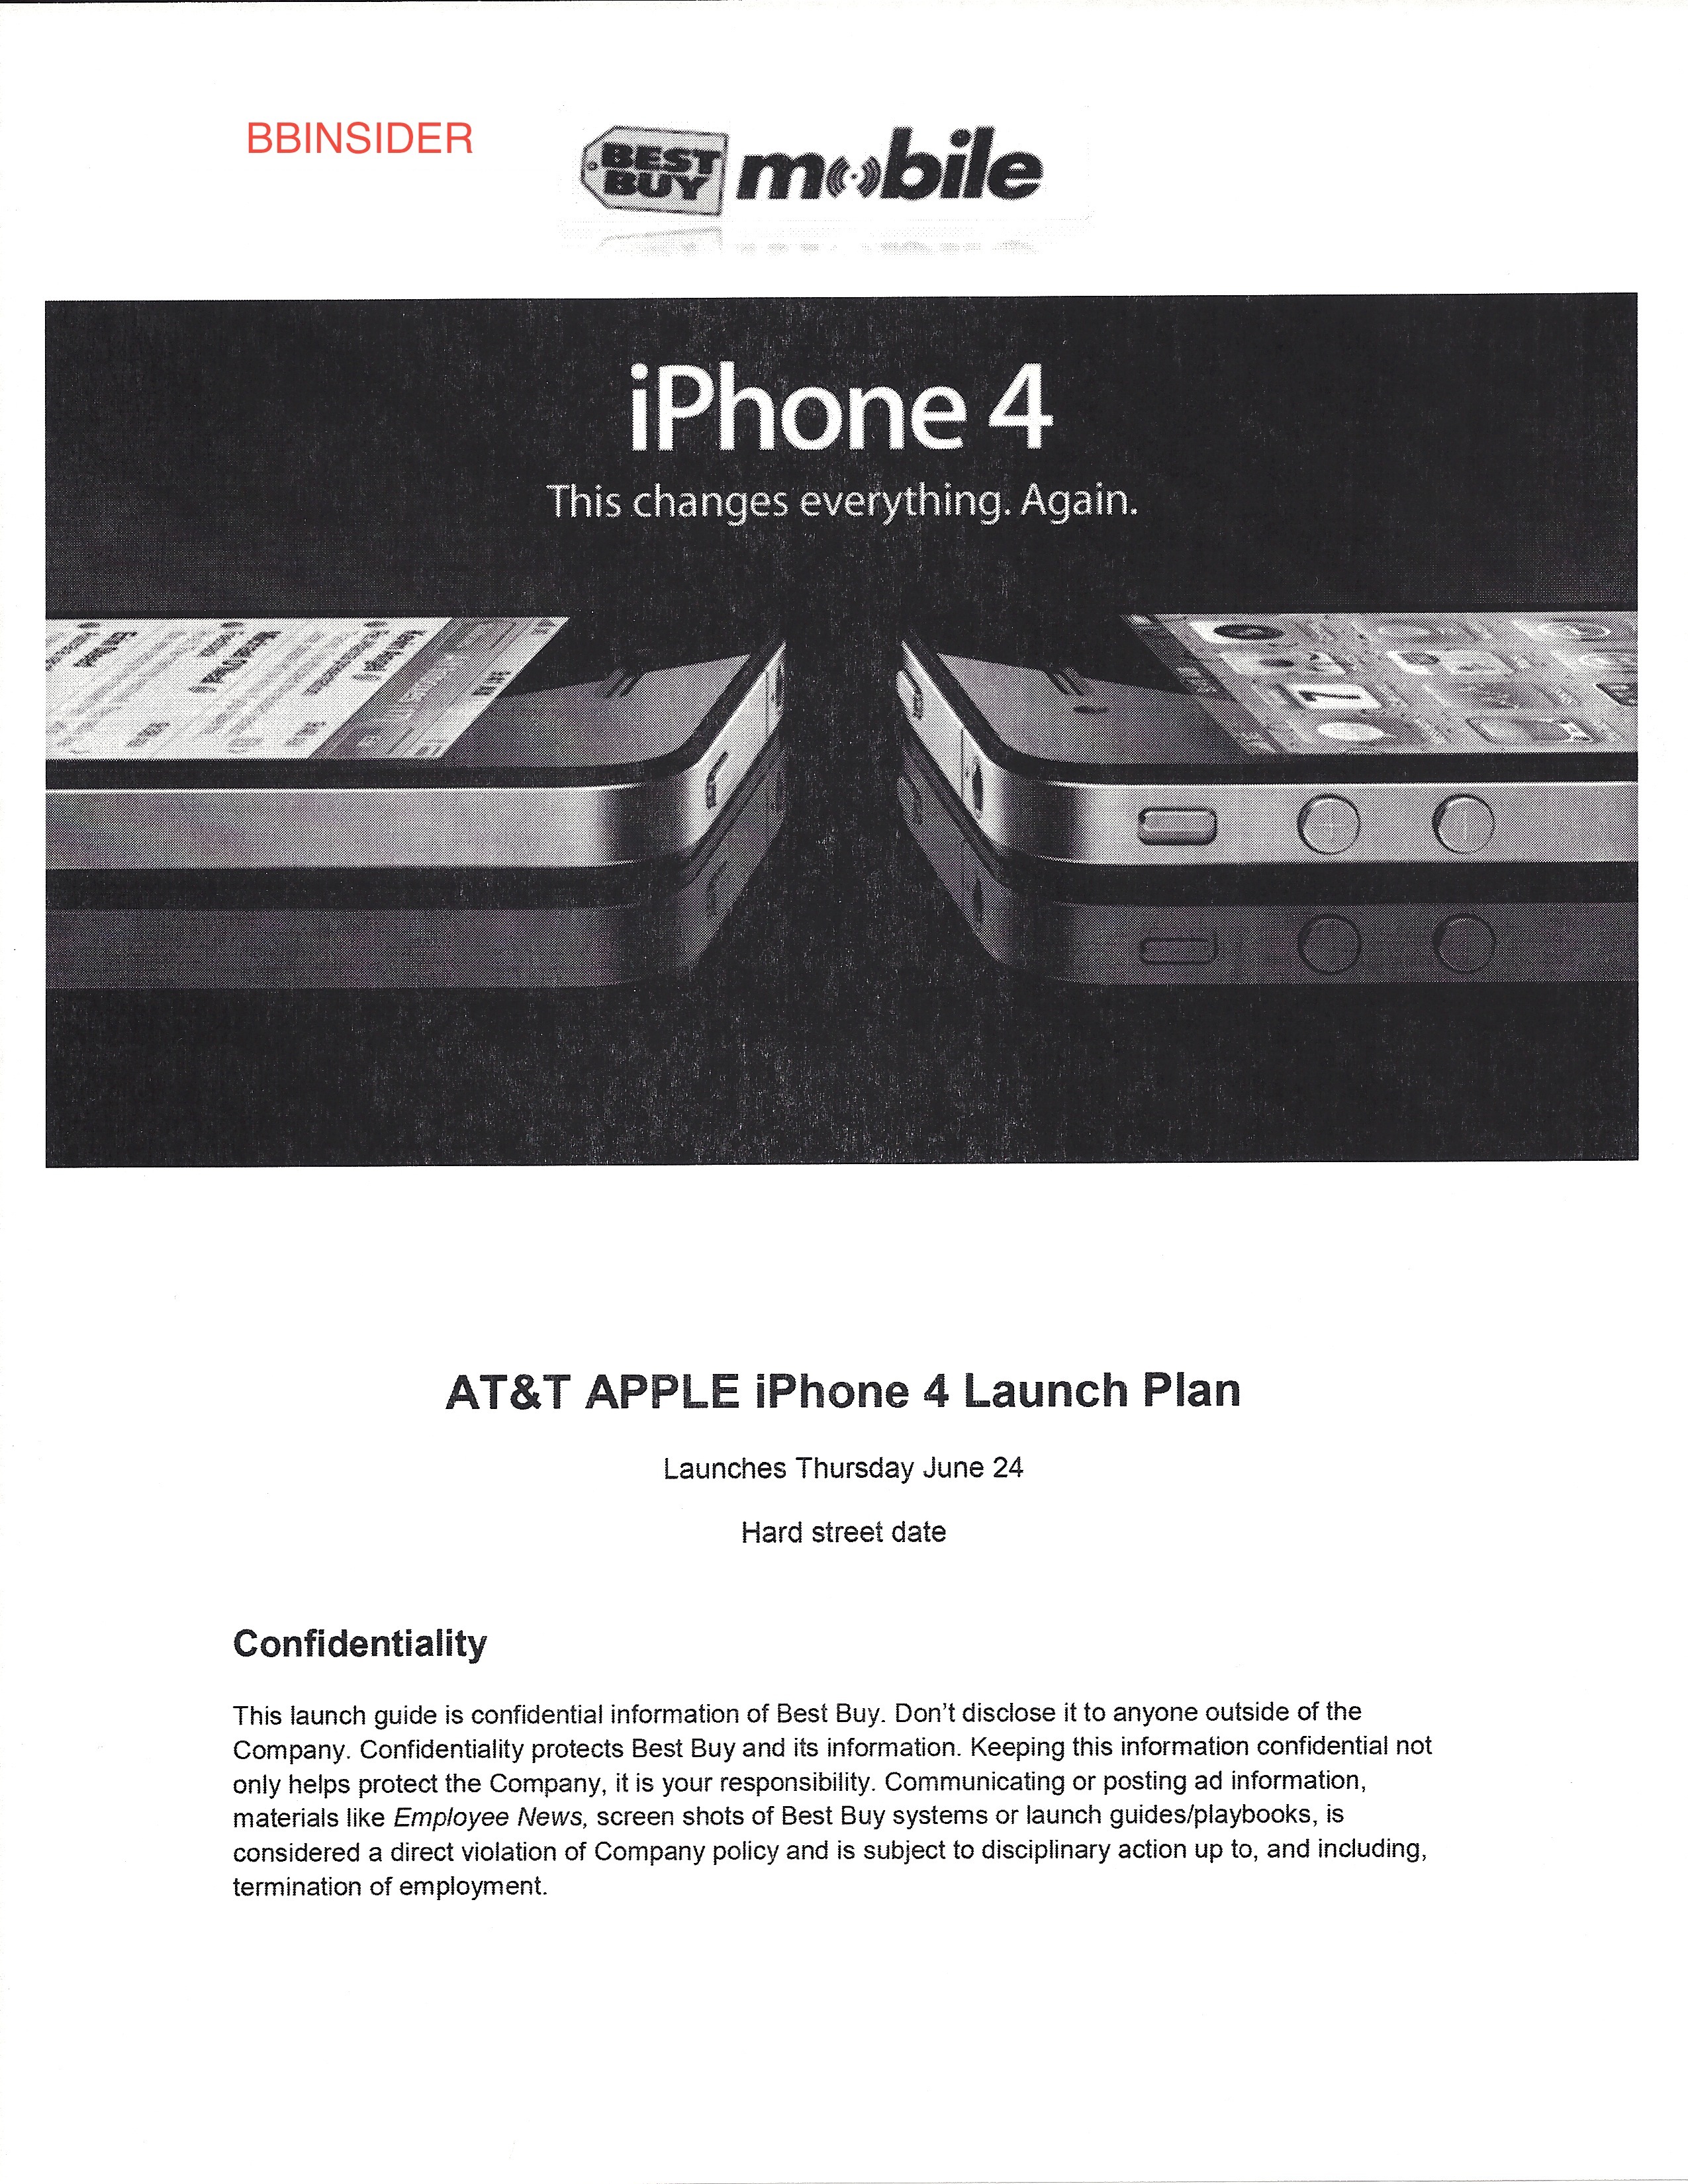 Entire Best Buy iPhone 4 Launch Plan Leaked!